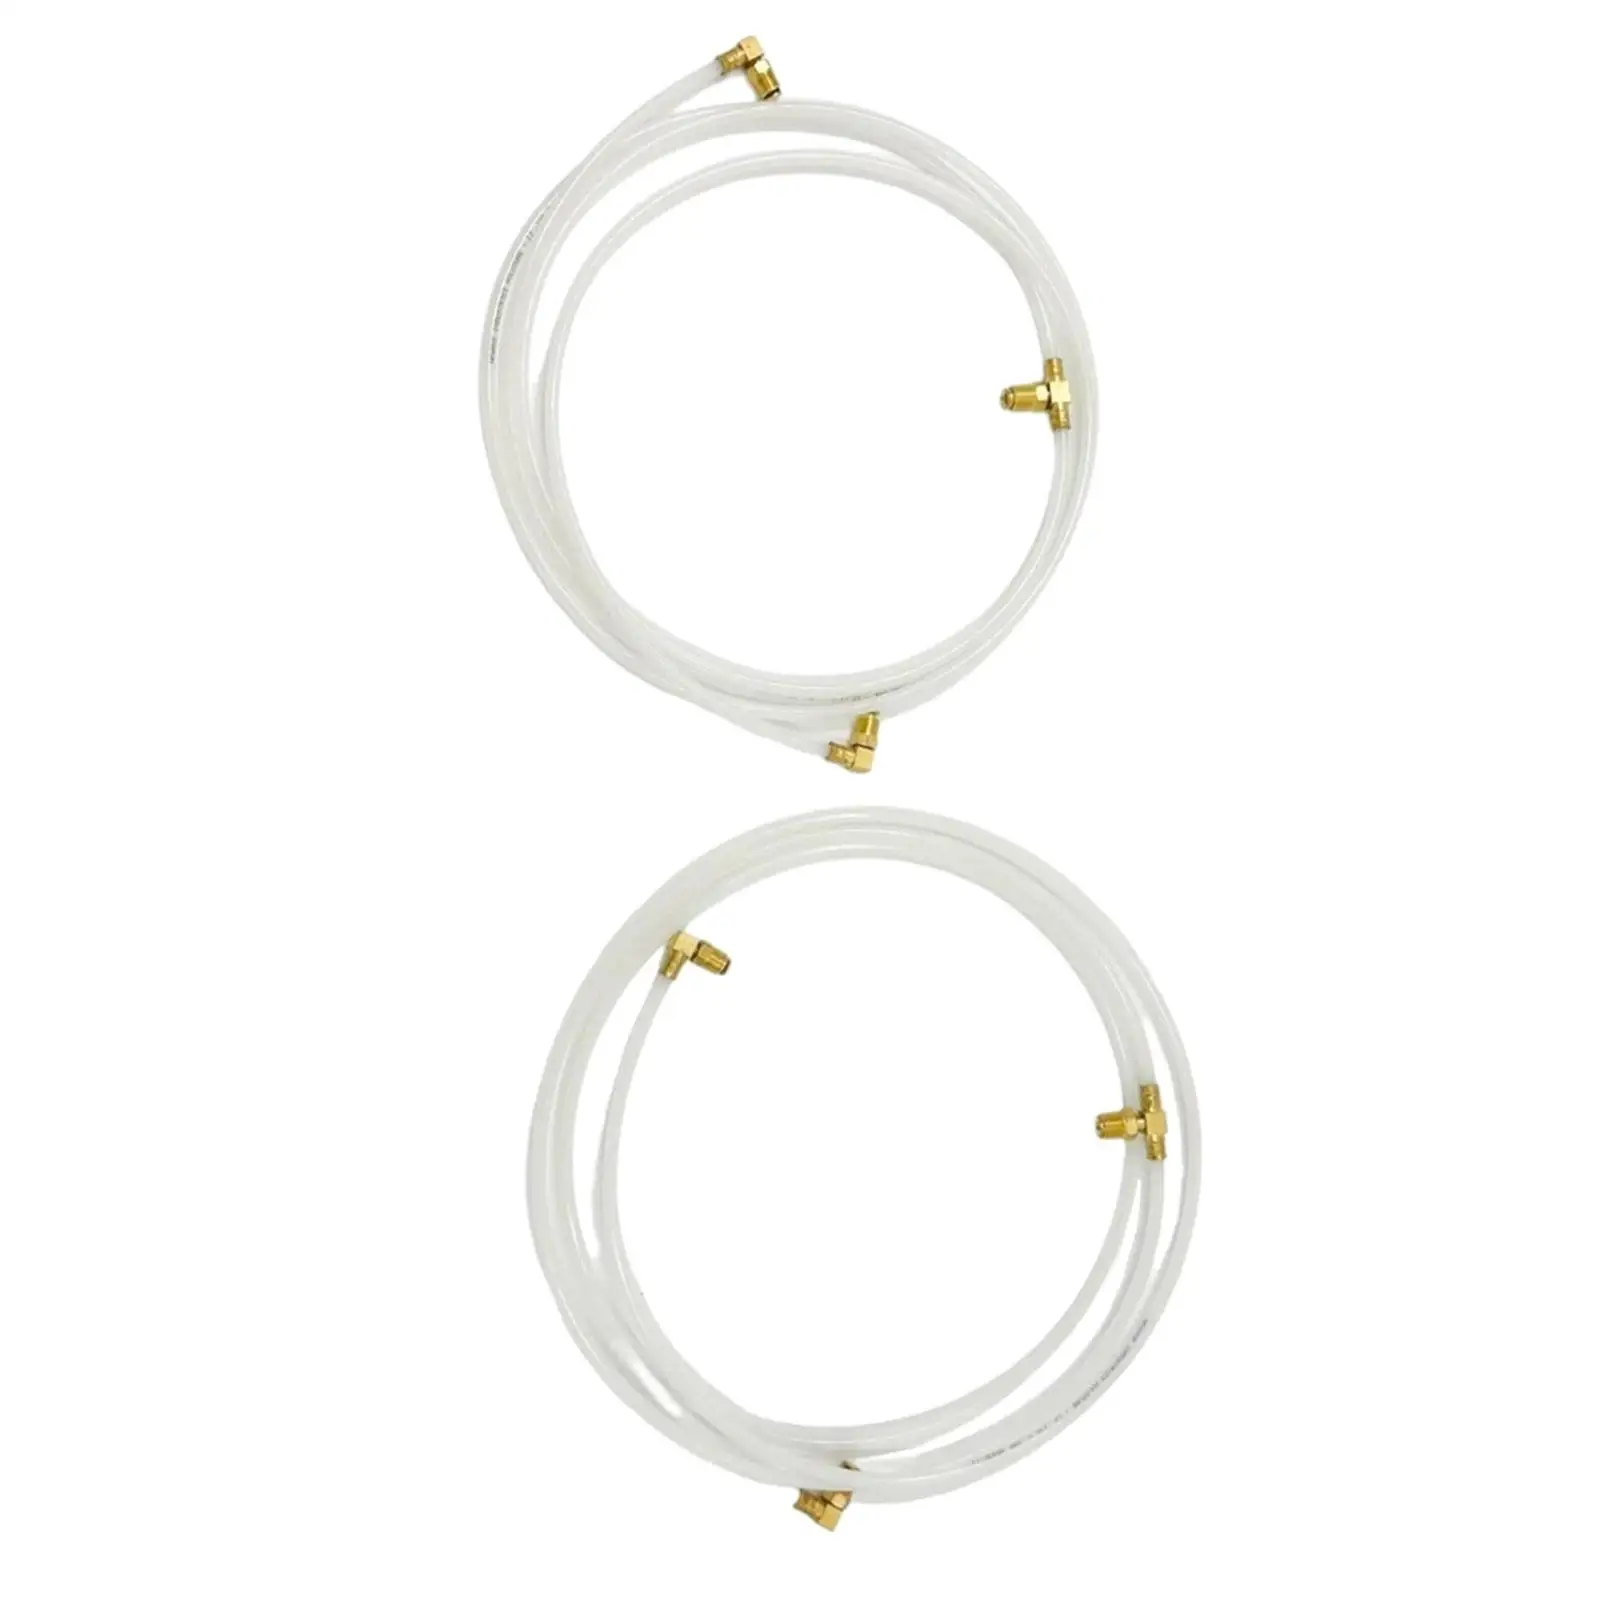 Convertible Top Hydraulic Fluid Hose Line Pair Hoses Ho-white-set for Chevrolet Chevy II Impala Professional Quality